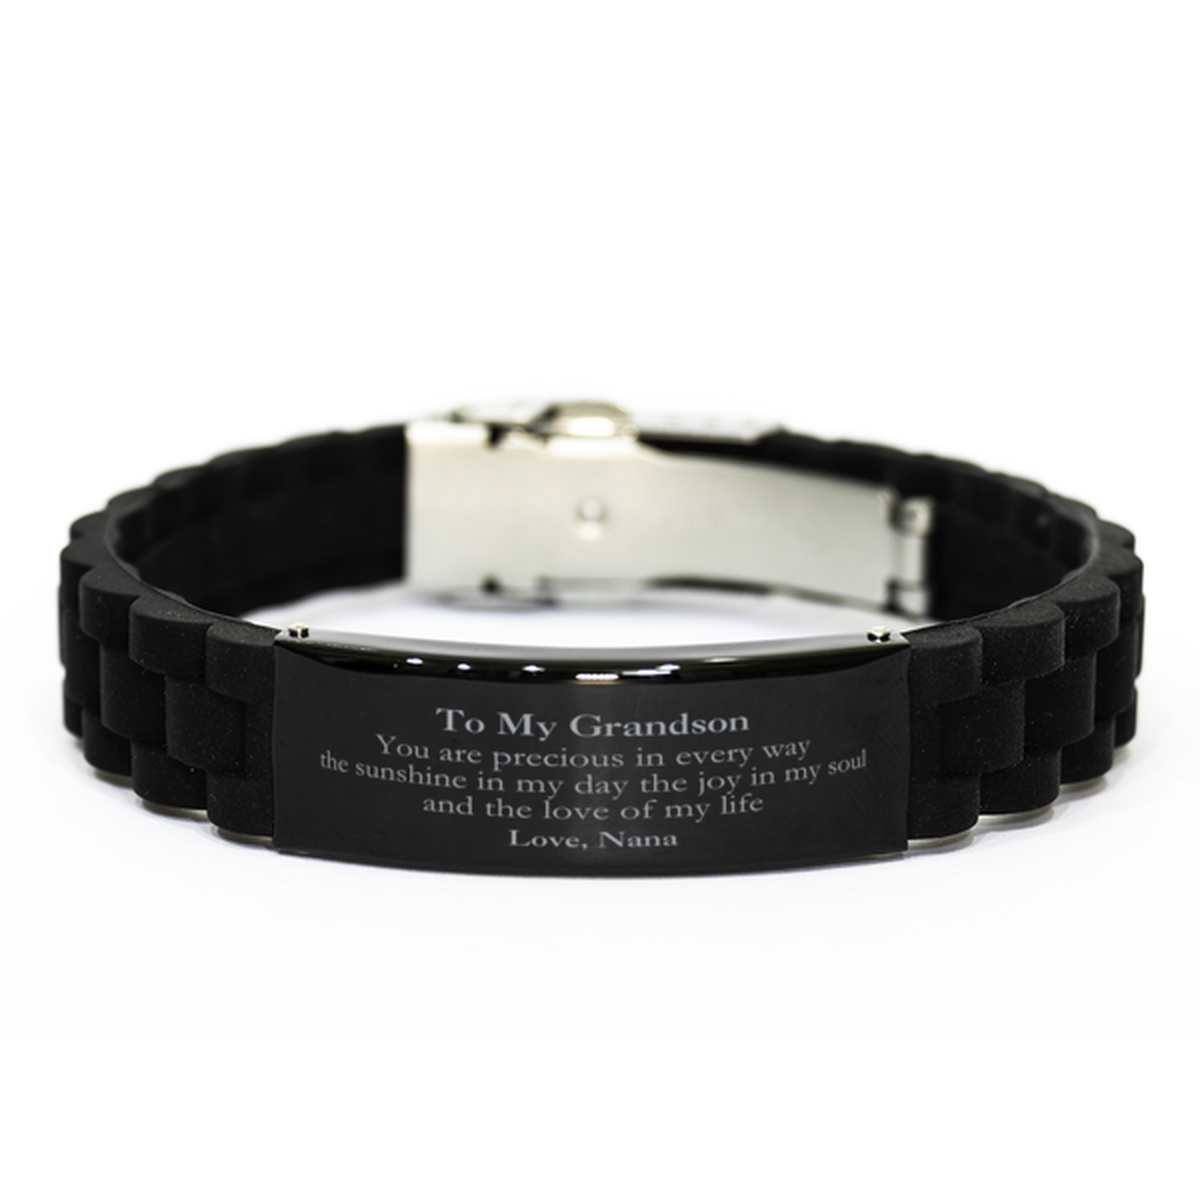 Graduation Gifts for Grandson Black Glidelock Clasp Bracelet Present from Nana, Christmas Grandson Birthday Gifts Grandson You are precious in every way the sunshine in my day. Love, Nana